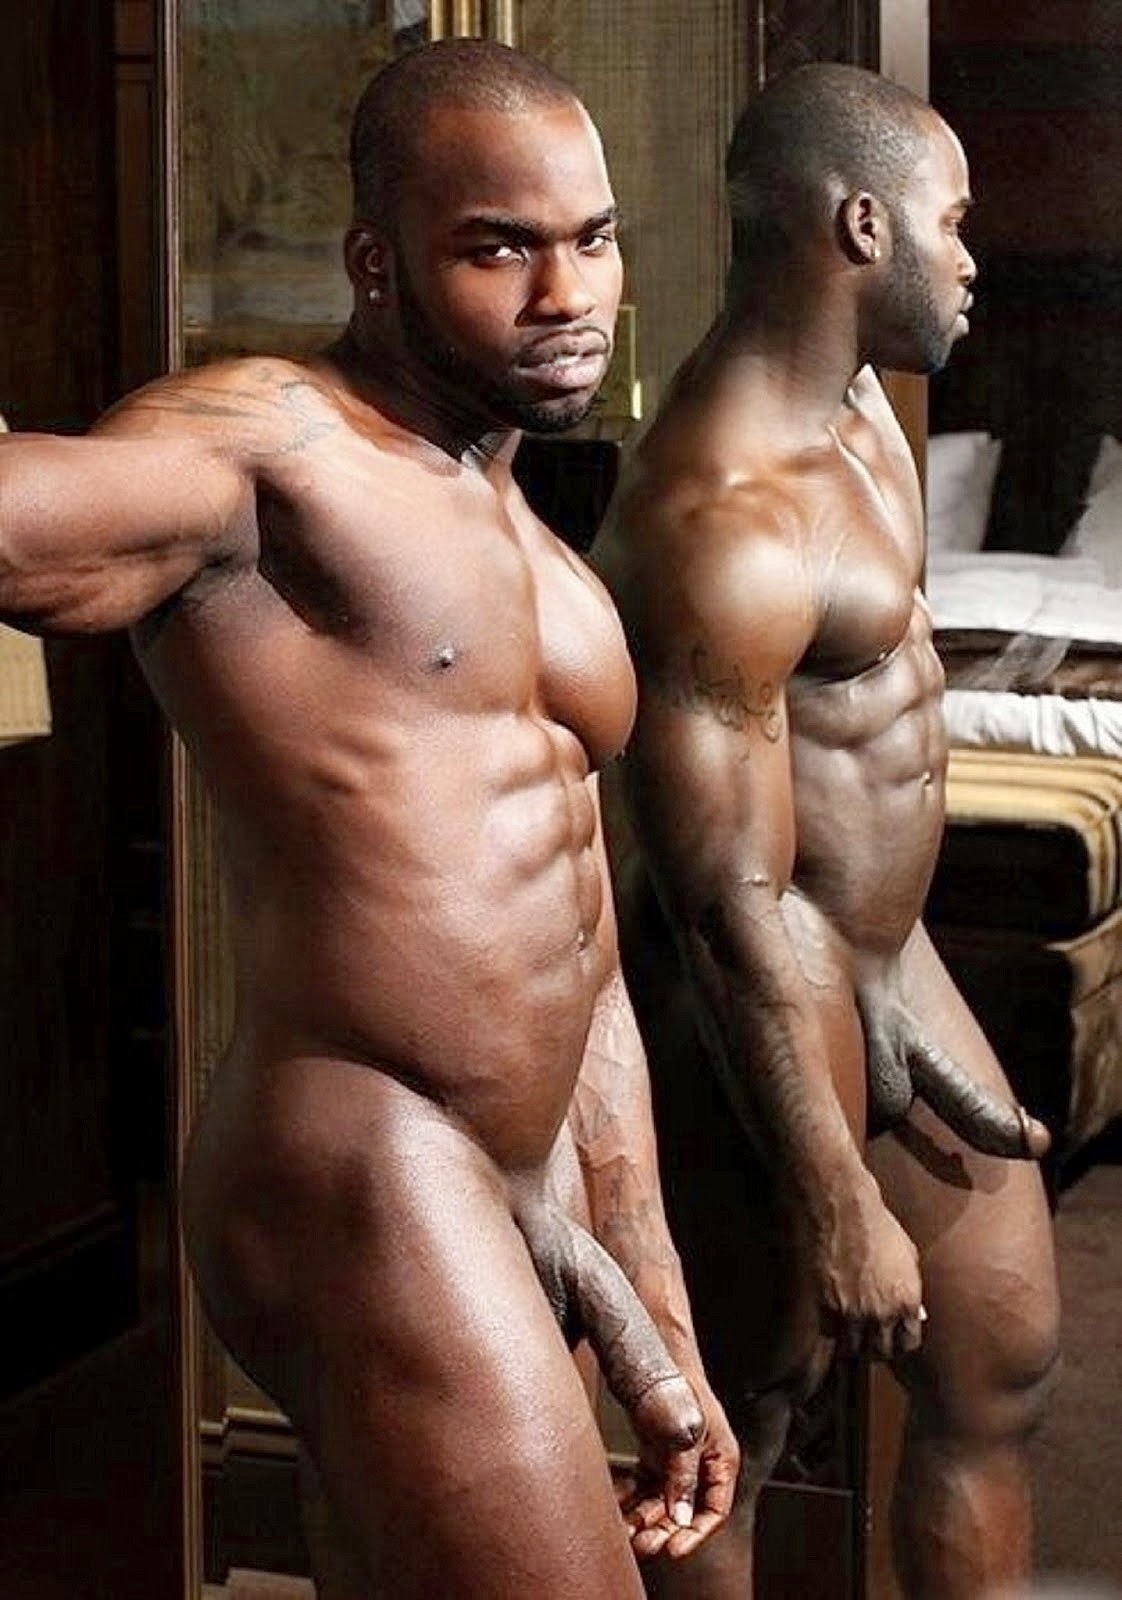 Black and Beautiful: A Salute to Bronze Manhood, Part 2.